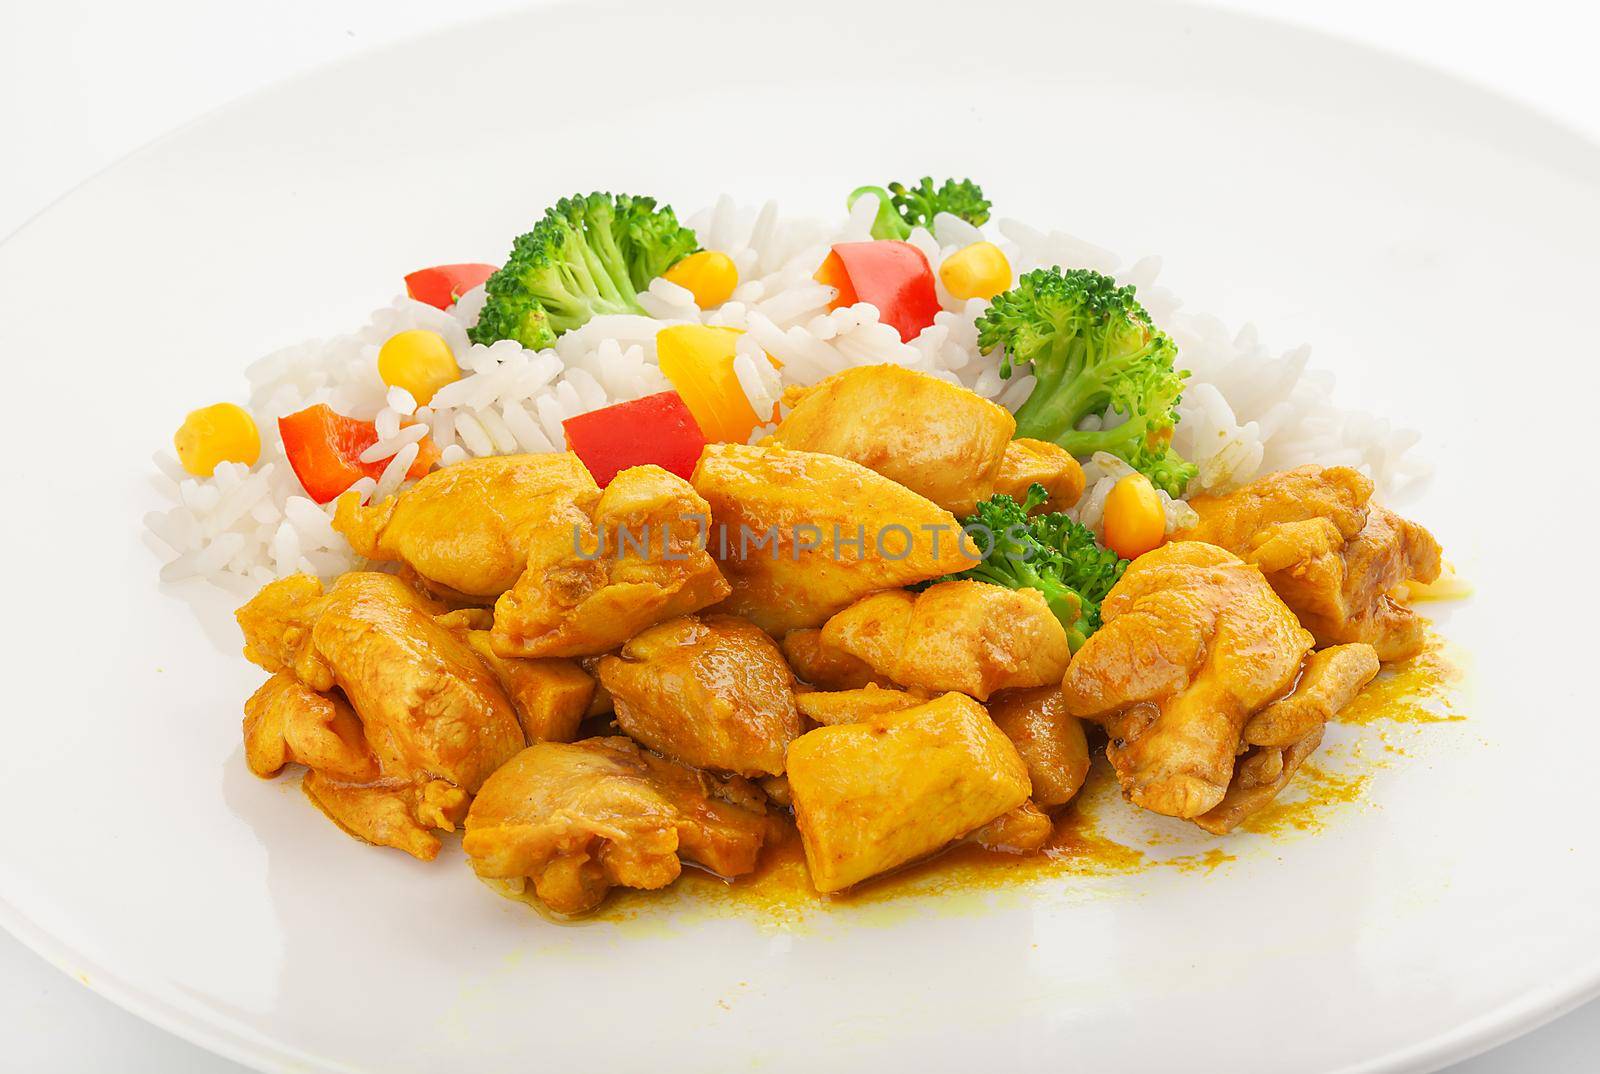 Chicken curry with rice and vegetables by Angorius